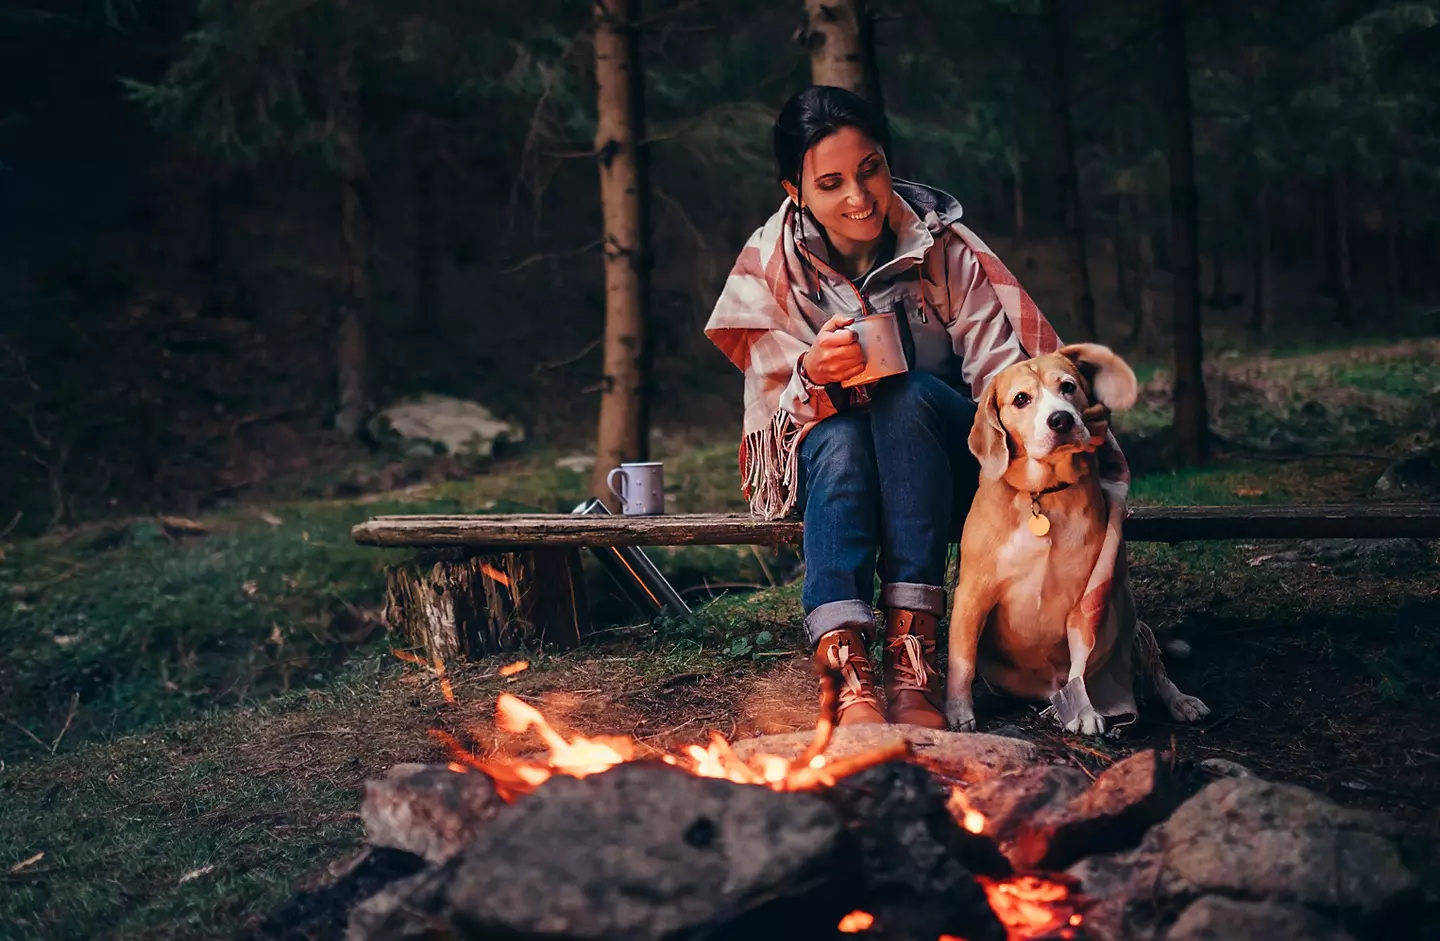 Dog sitting next to owner by campfire.